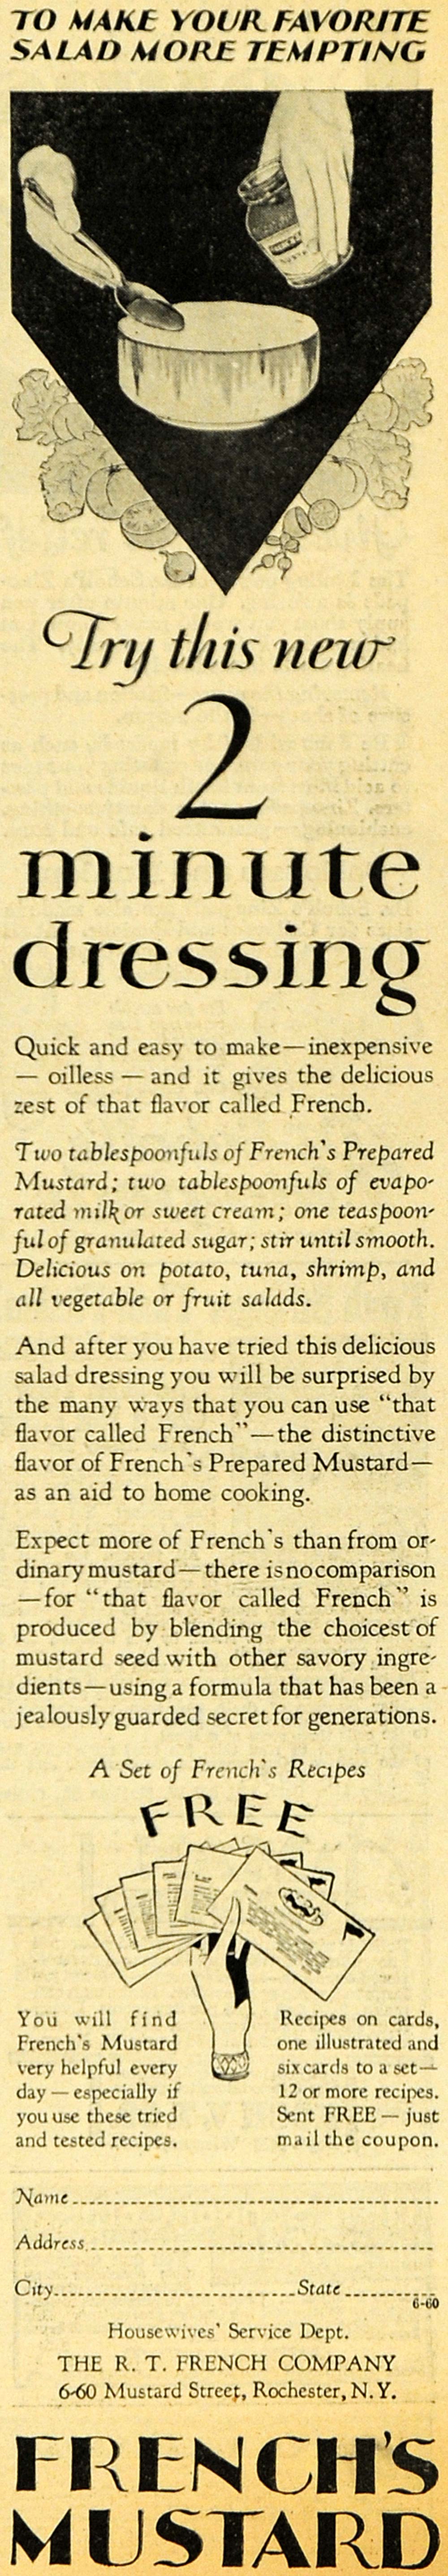 1929 Ad French's Mustard Two Minute Dressing Recipe - ORIGINAL ADVERTISING HOH1